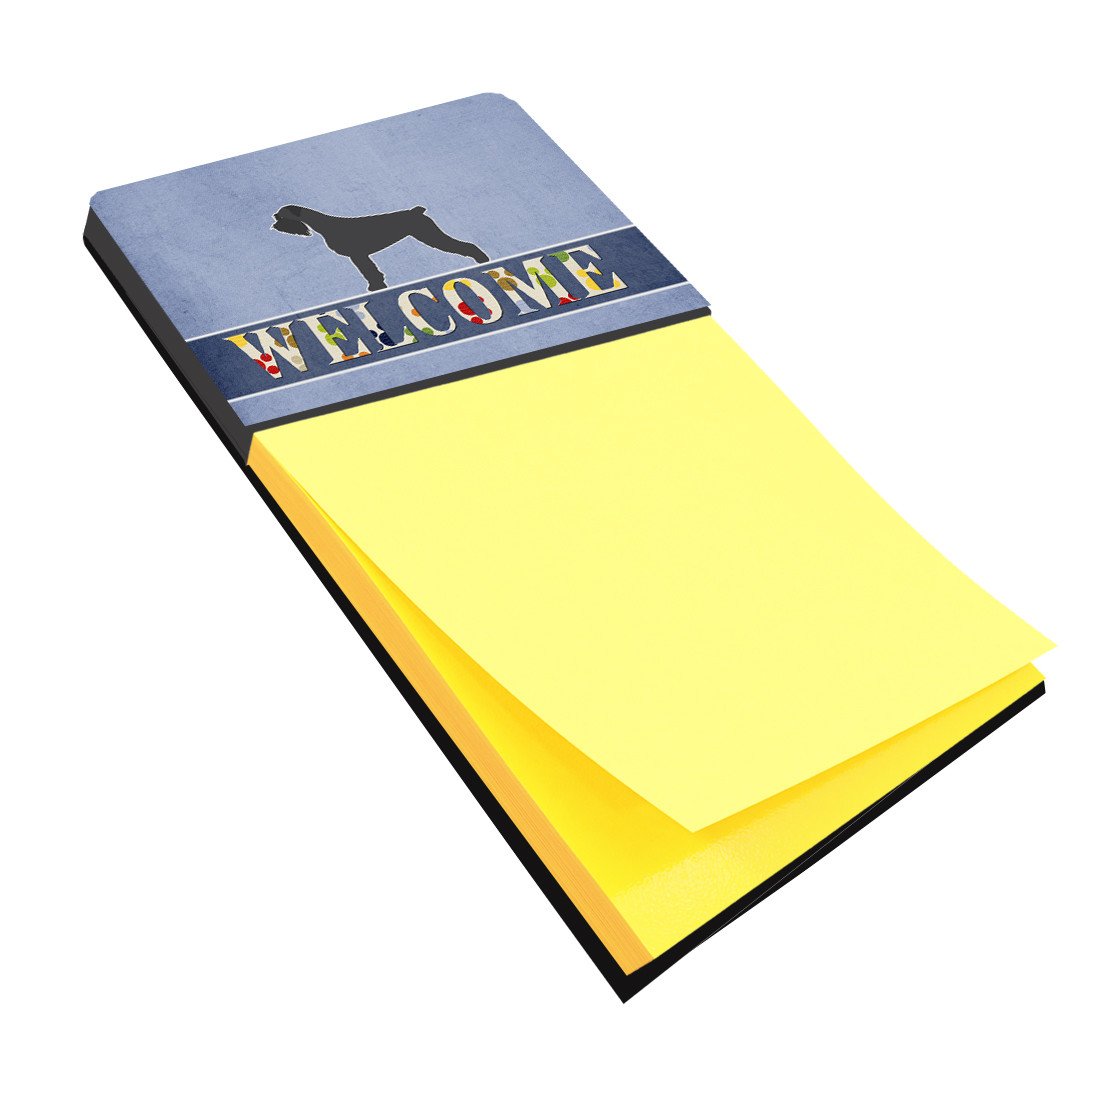 Giant Schnauzer Welcome Sticky Note Holder BB5577SN by Caroline's Treasures